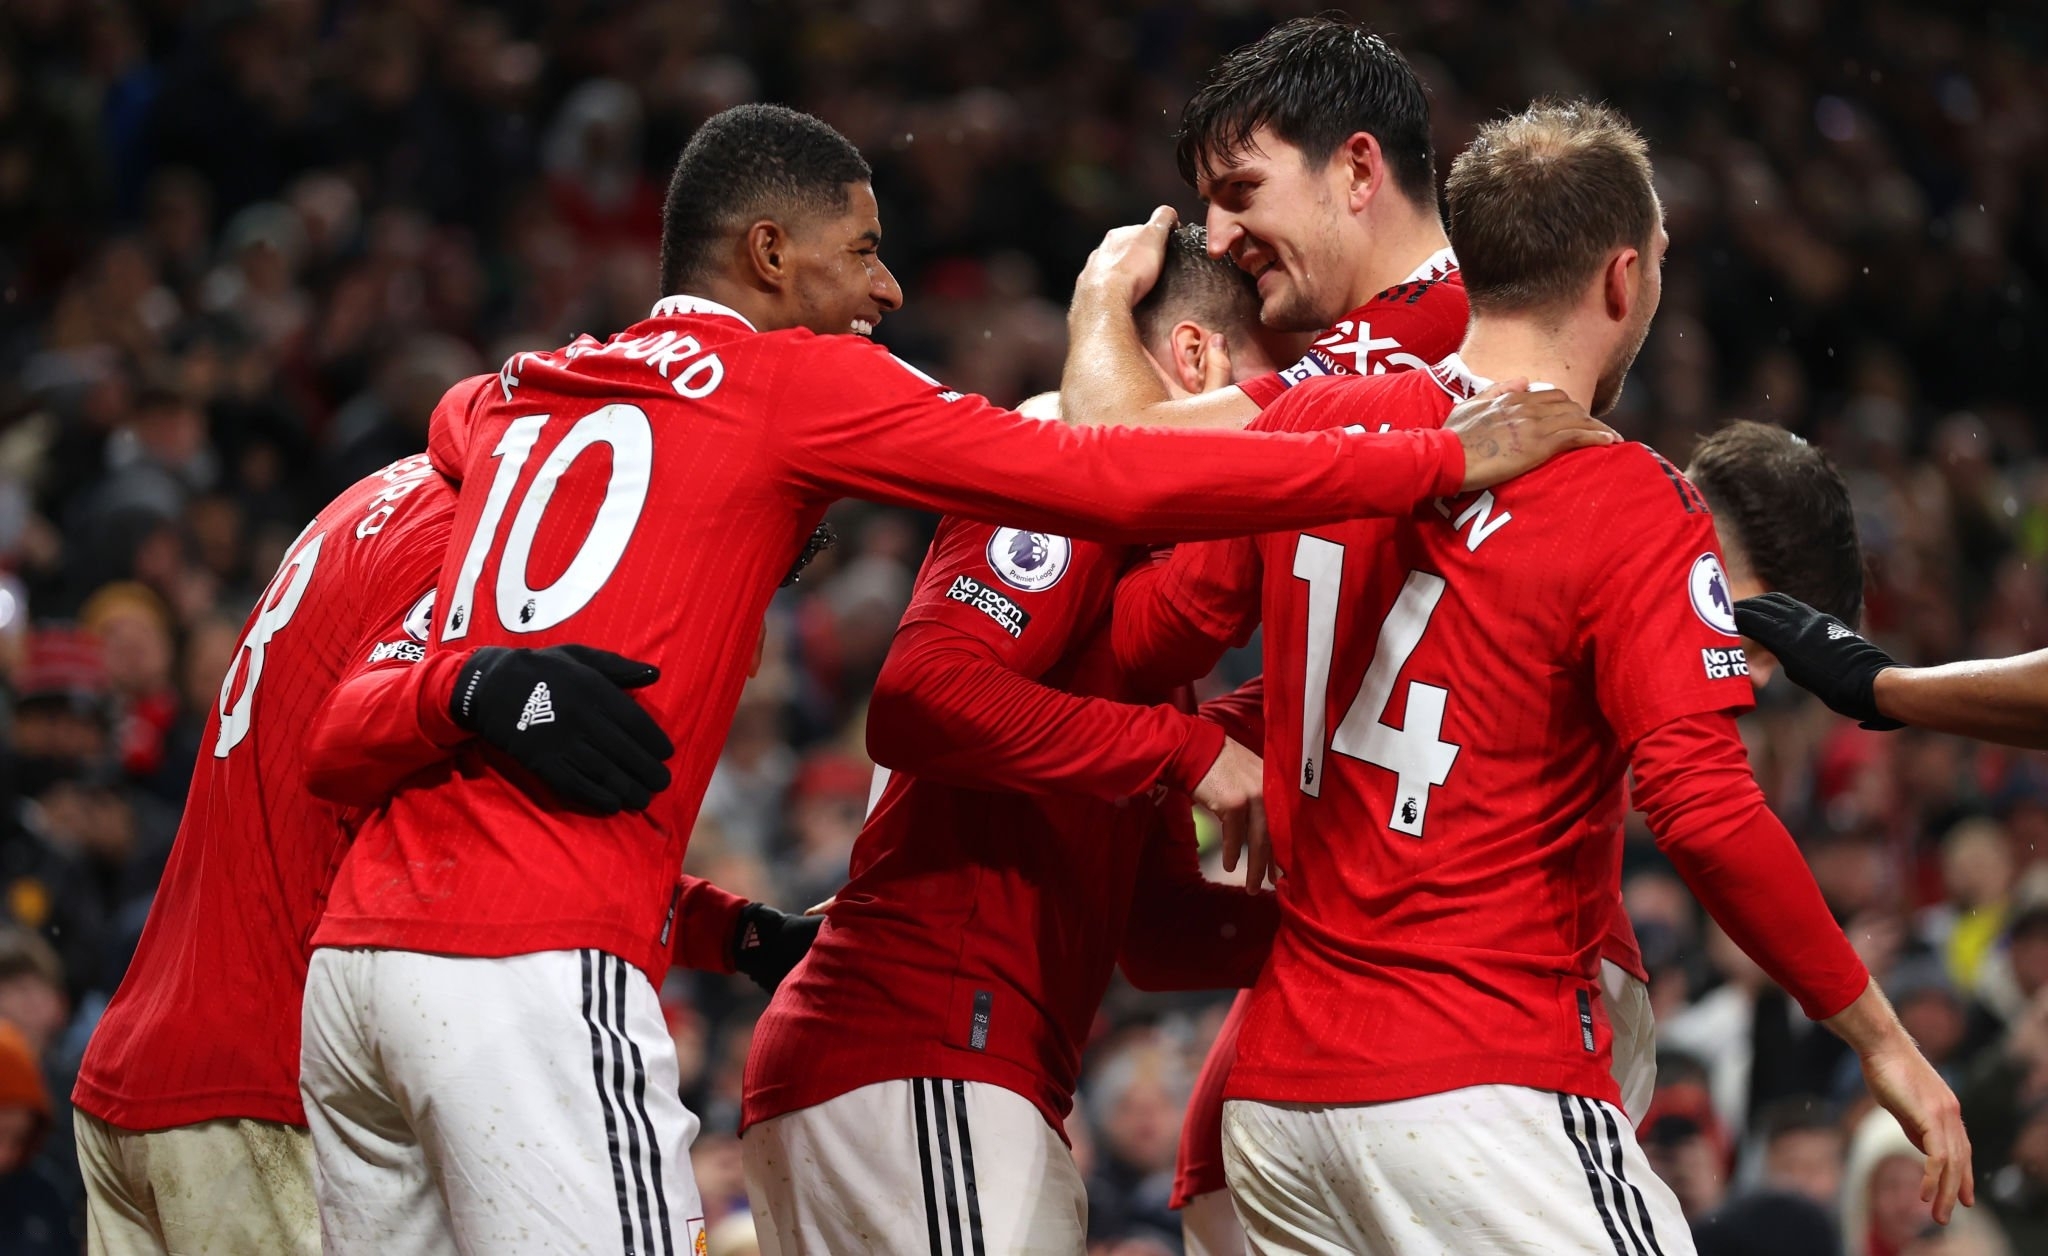 Manchester United 3 - 0 Bournemouth